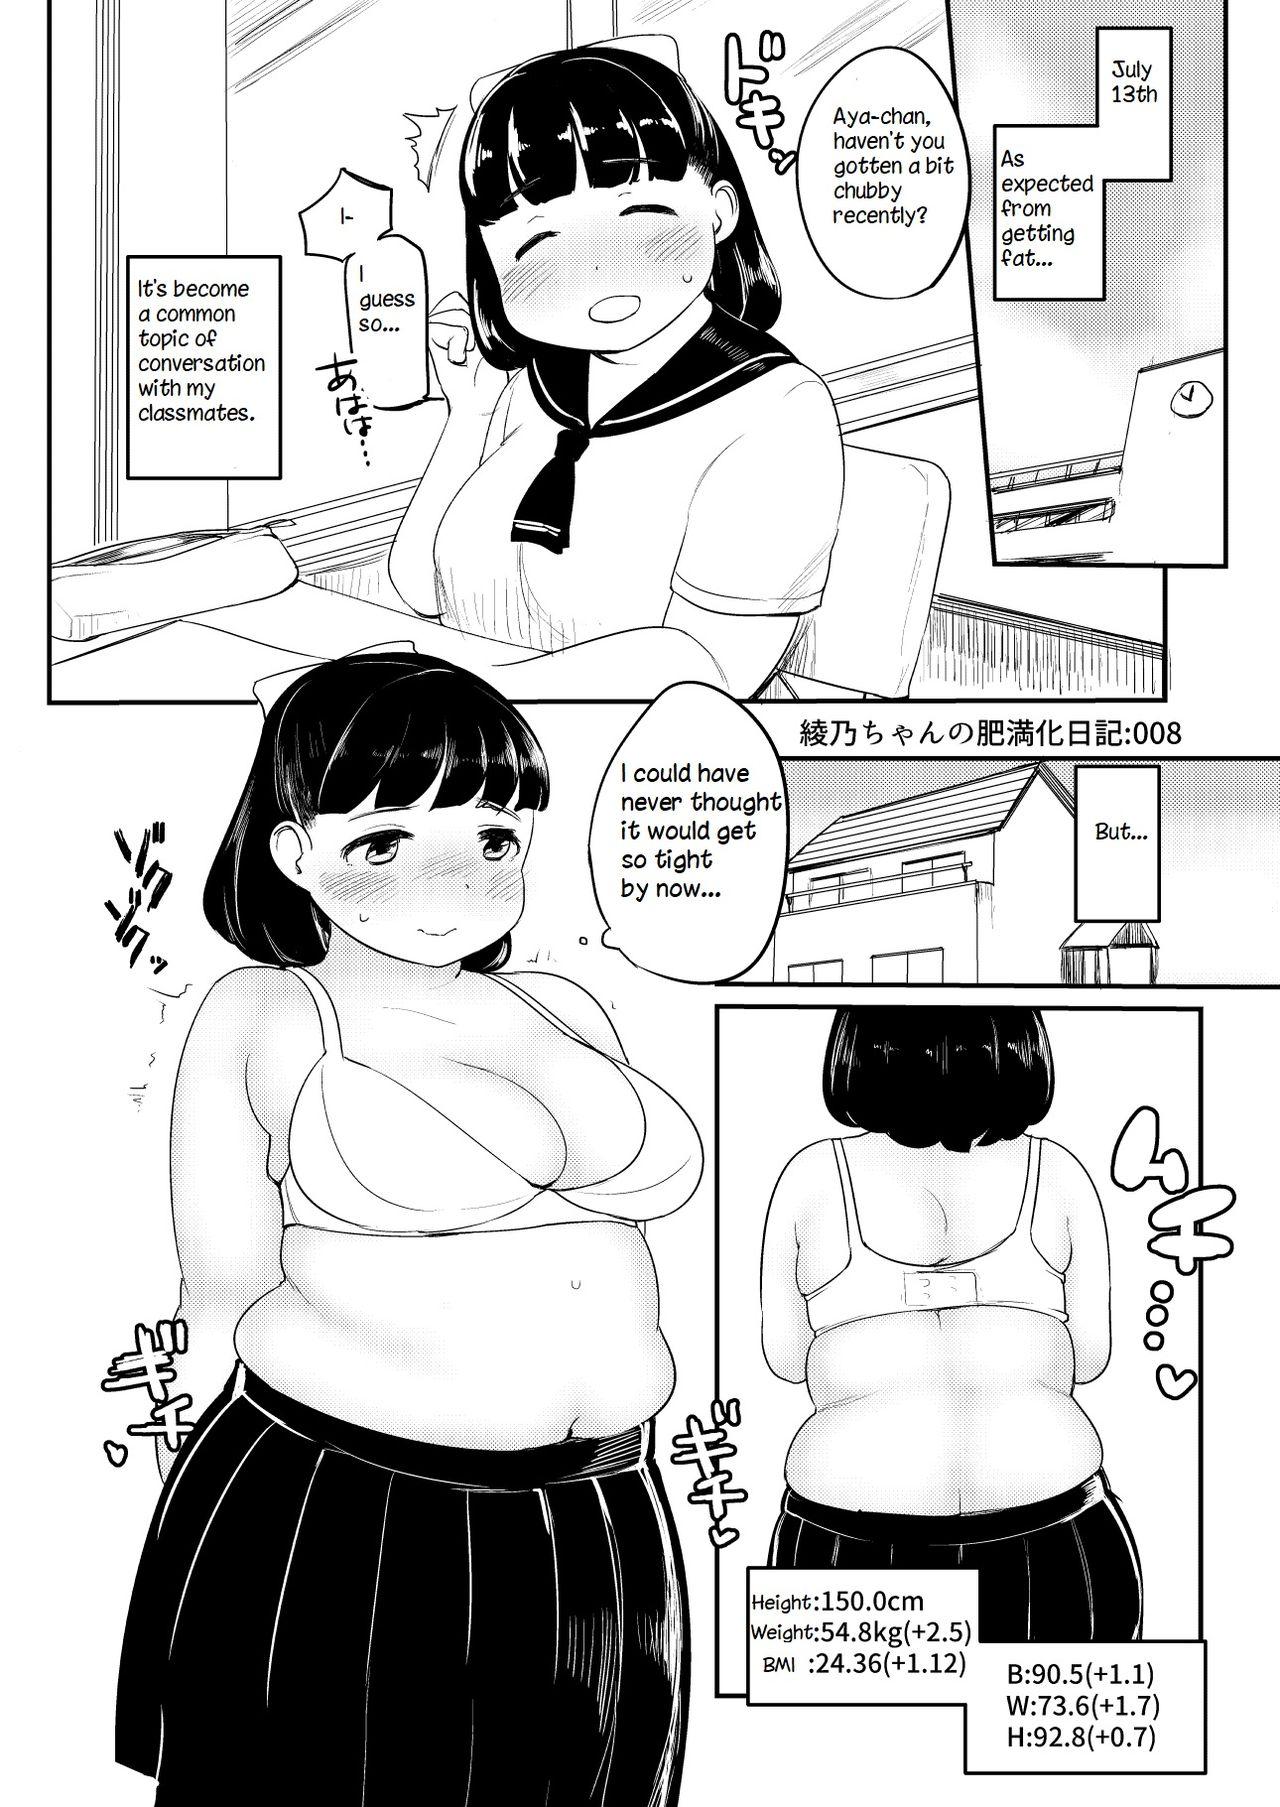 Ink Ayano's Weight Gain Diary Relax - Page 8